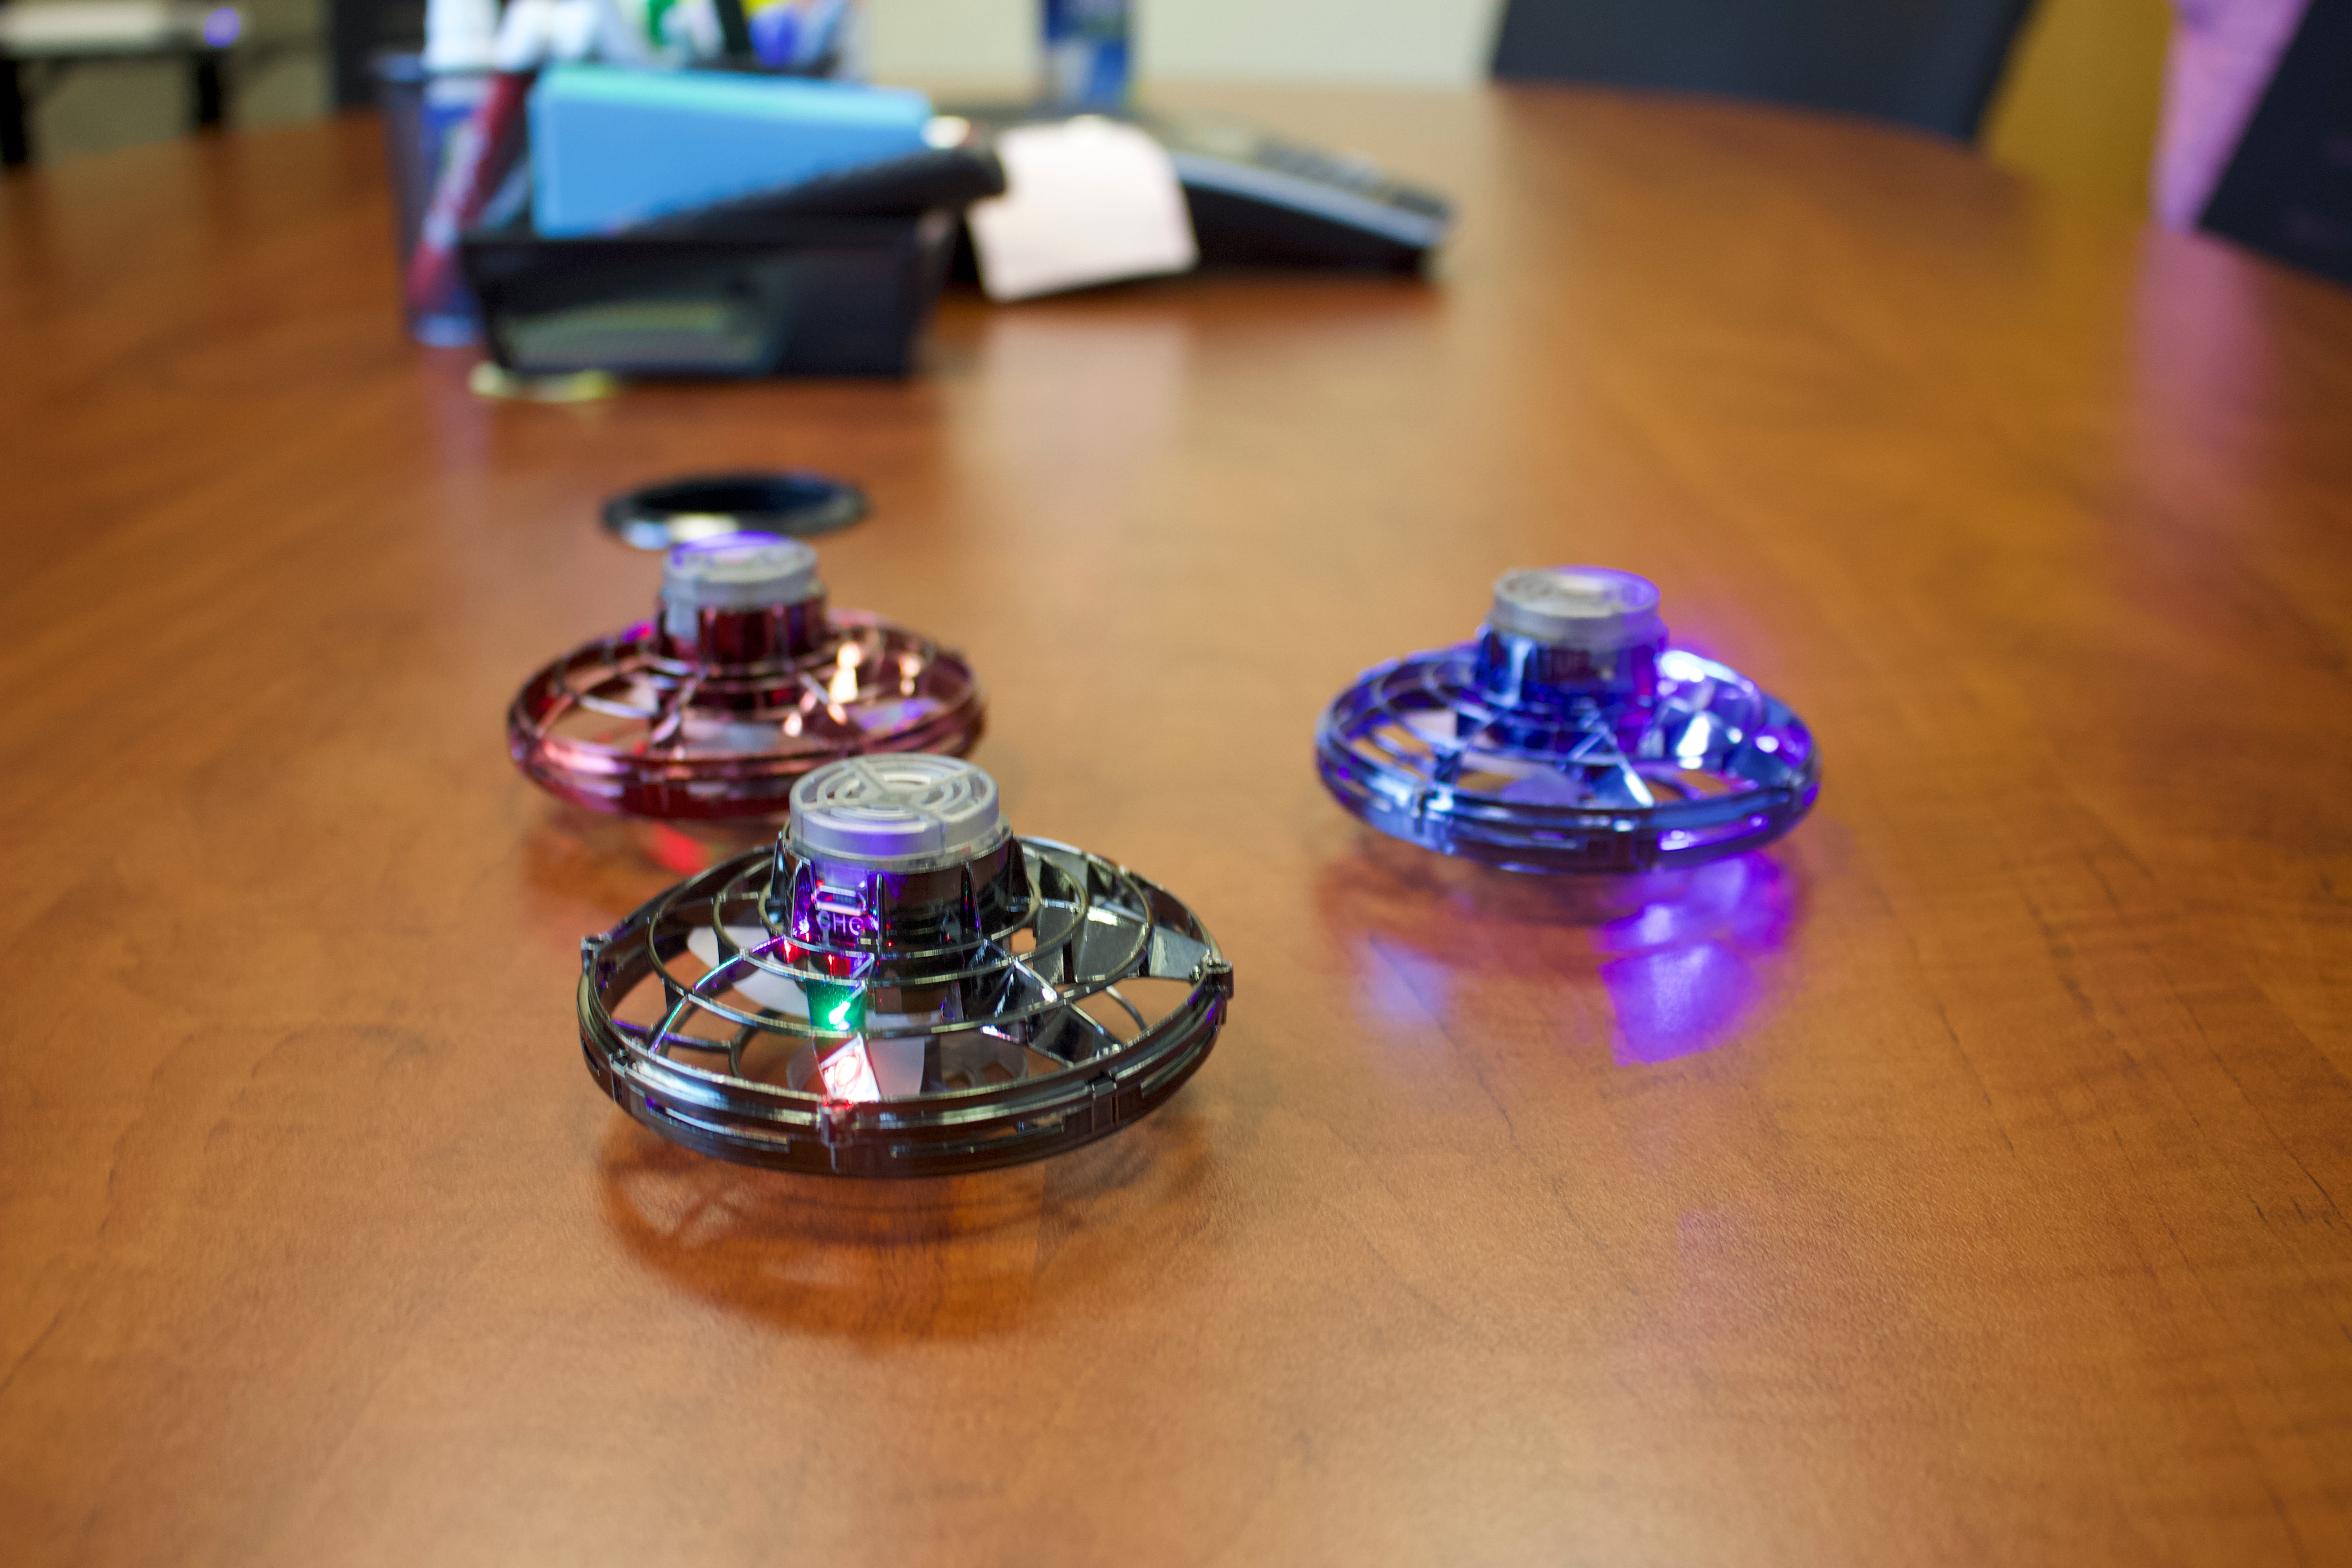 Flying Fidget Spinner and Drone